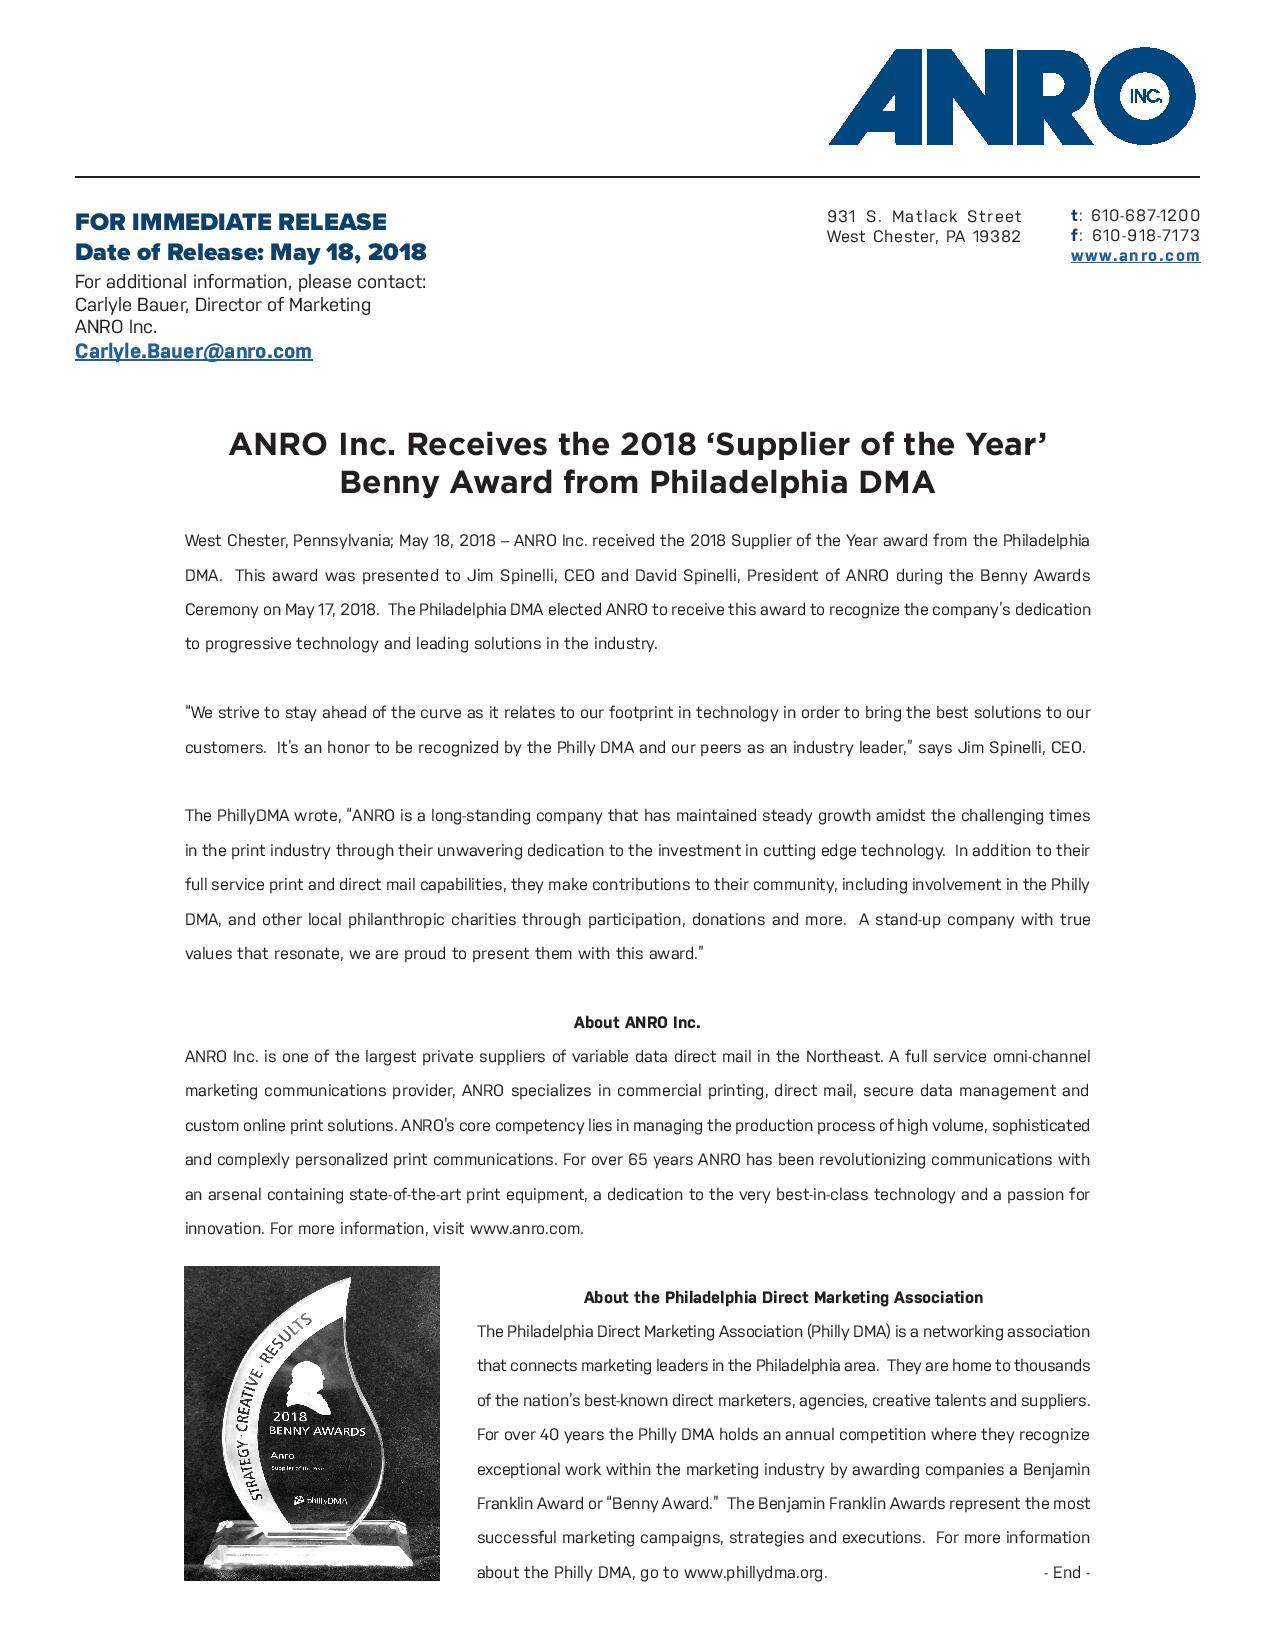 ANRO Inc. Receives the 2018 ‘Supplier of the Year’
Benny Award from Philadelphia DMA